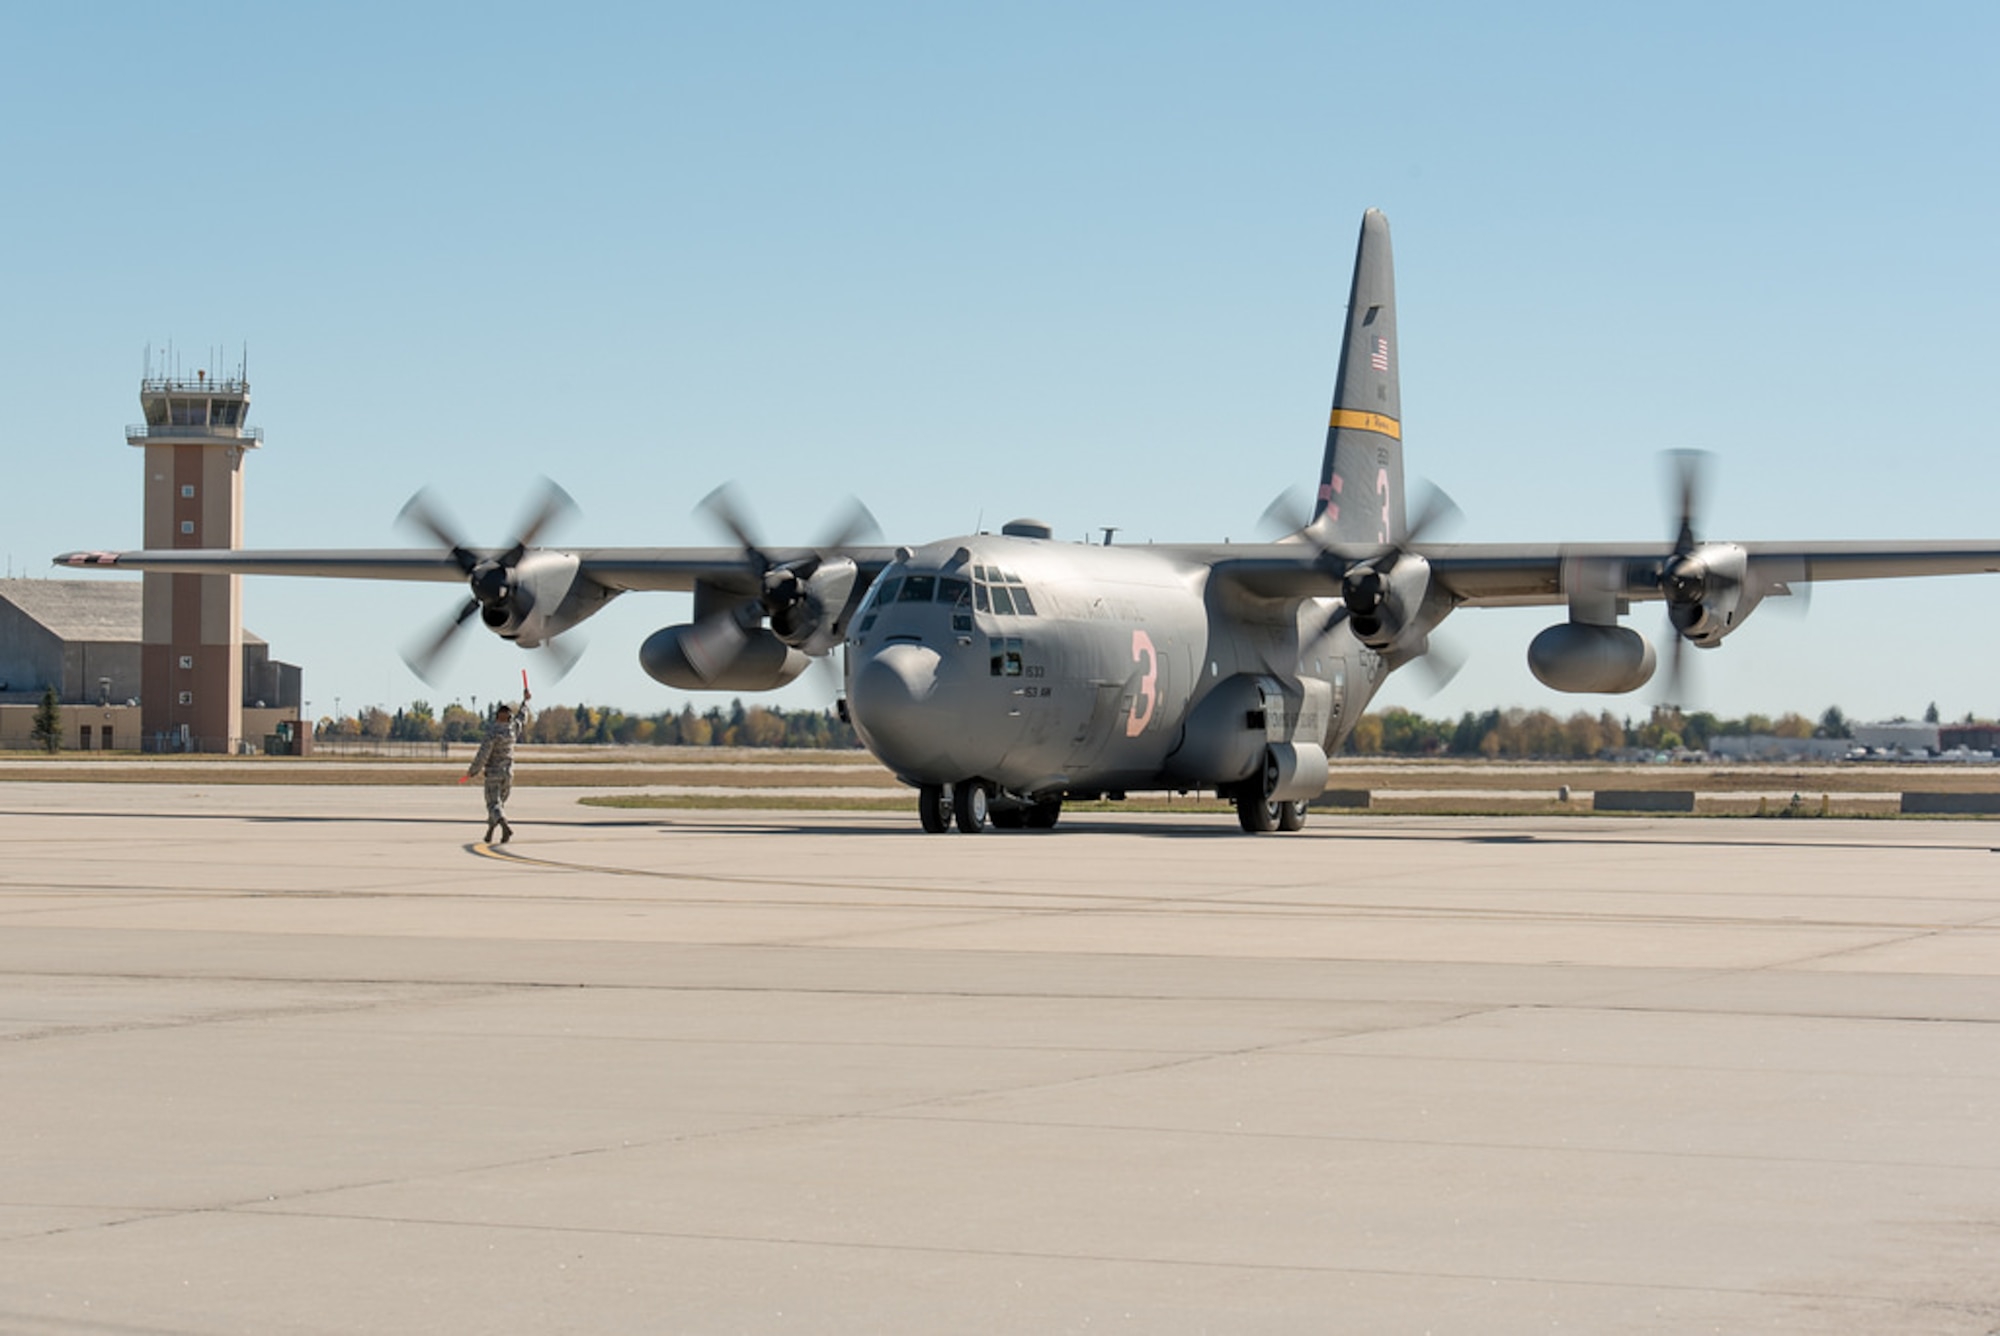 A C-130H Hercules aircraft, tail number 1533, returns to Cheyenne after 14 months of repair at Hill Air Force Base, in Ogden, Utah. The aircraft landing gear was overhauled after a mechanical malfunction caused the aircrew to land with a partially extended nose landing gear after the aircraft was involved with fighting fires. (U.S. Air National Guard photo by Master Sgt. Charles Delano/released)